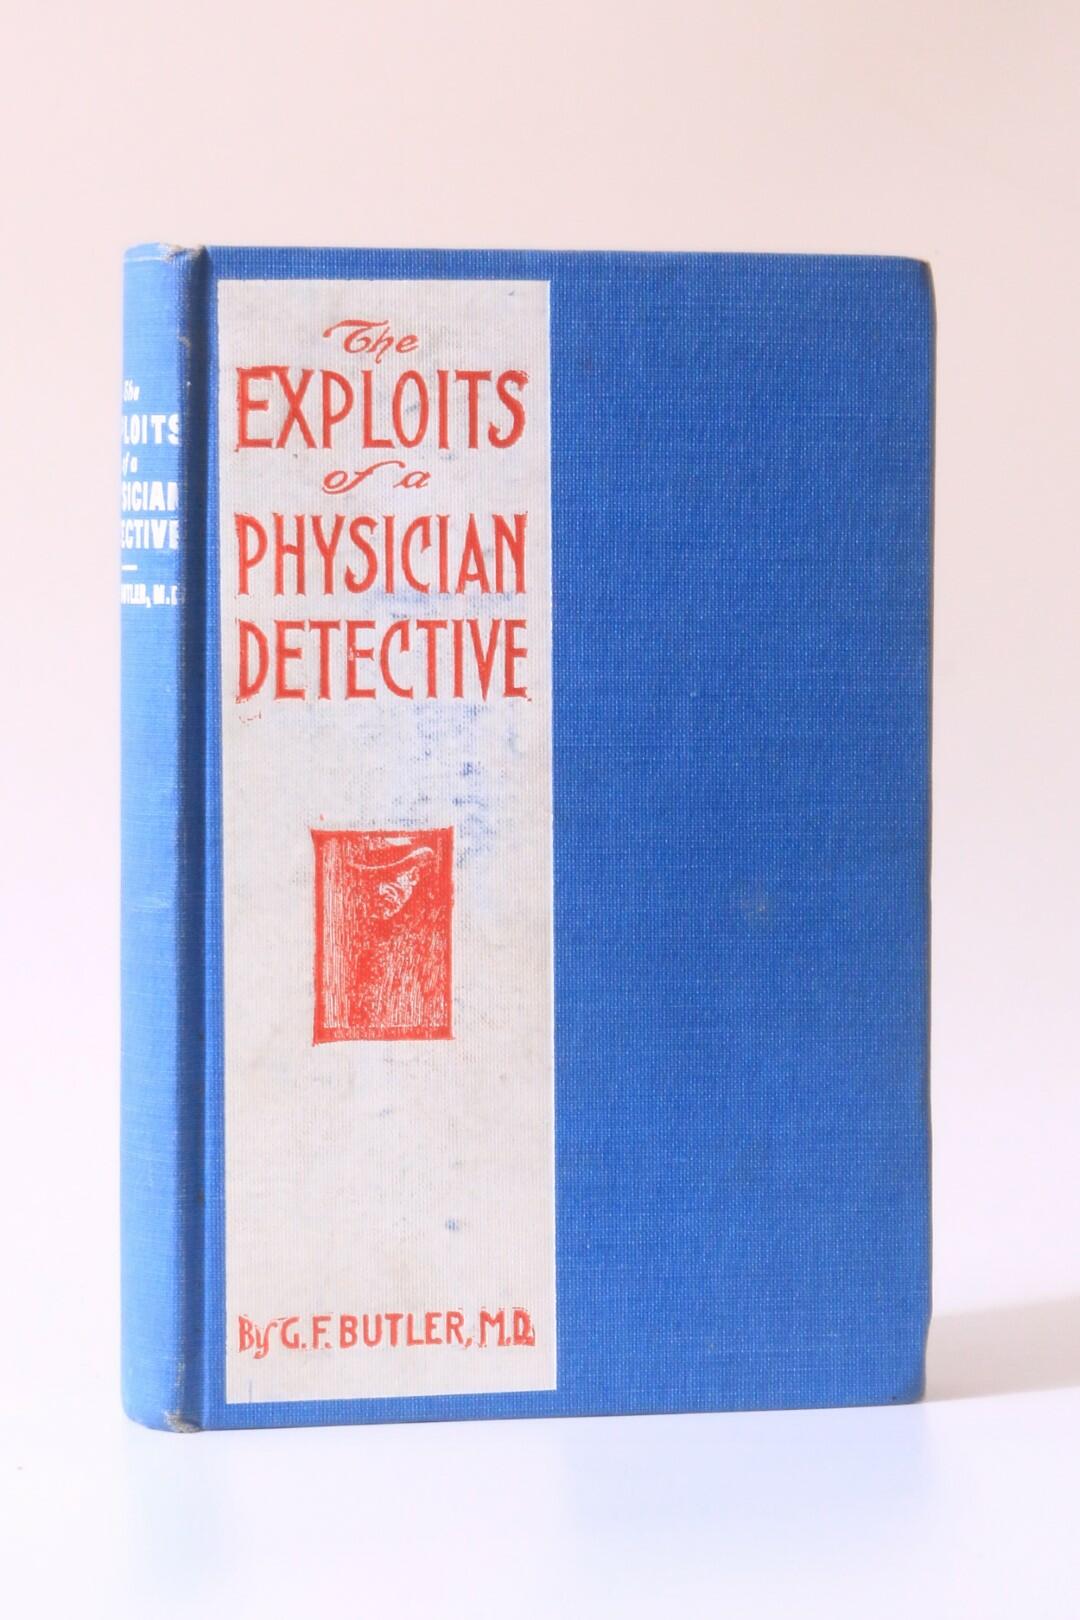 G.F. Butler - The Exploits of a Physician Detective - Clinic Publishing, 1908, First Edition.